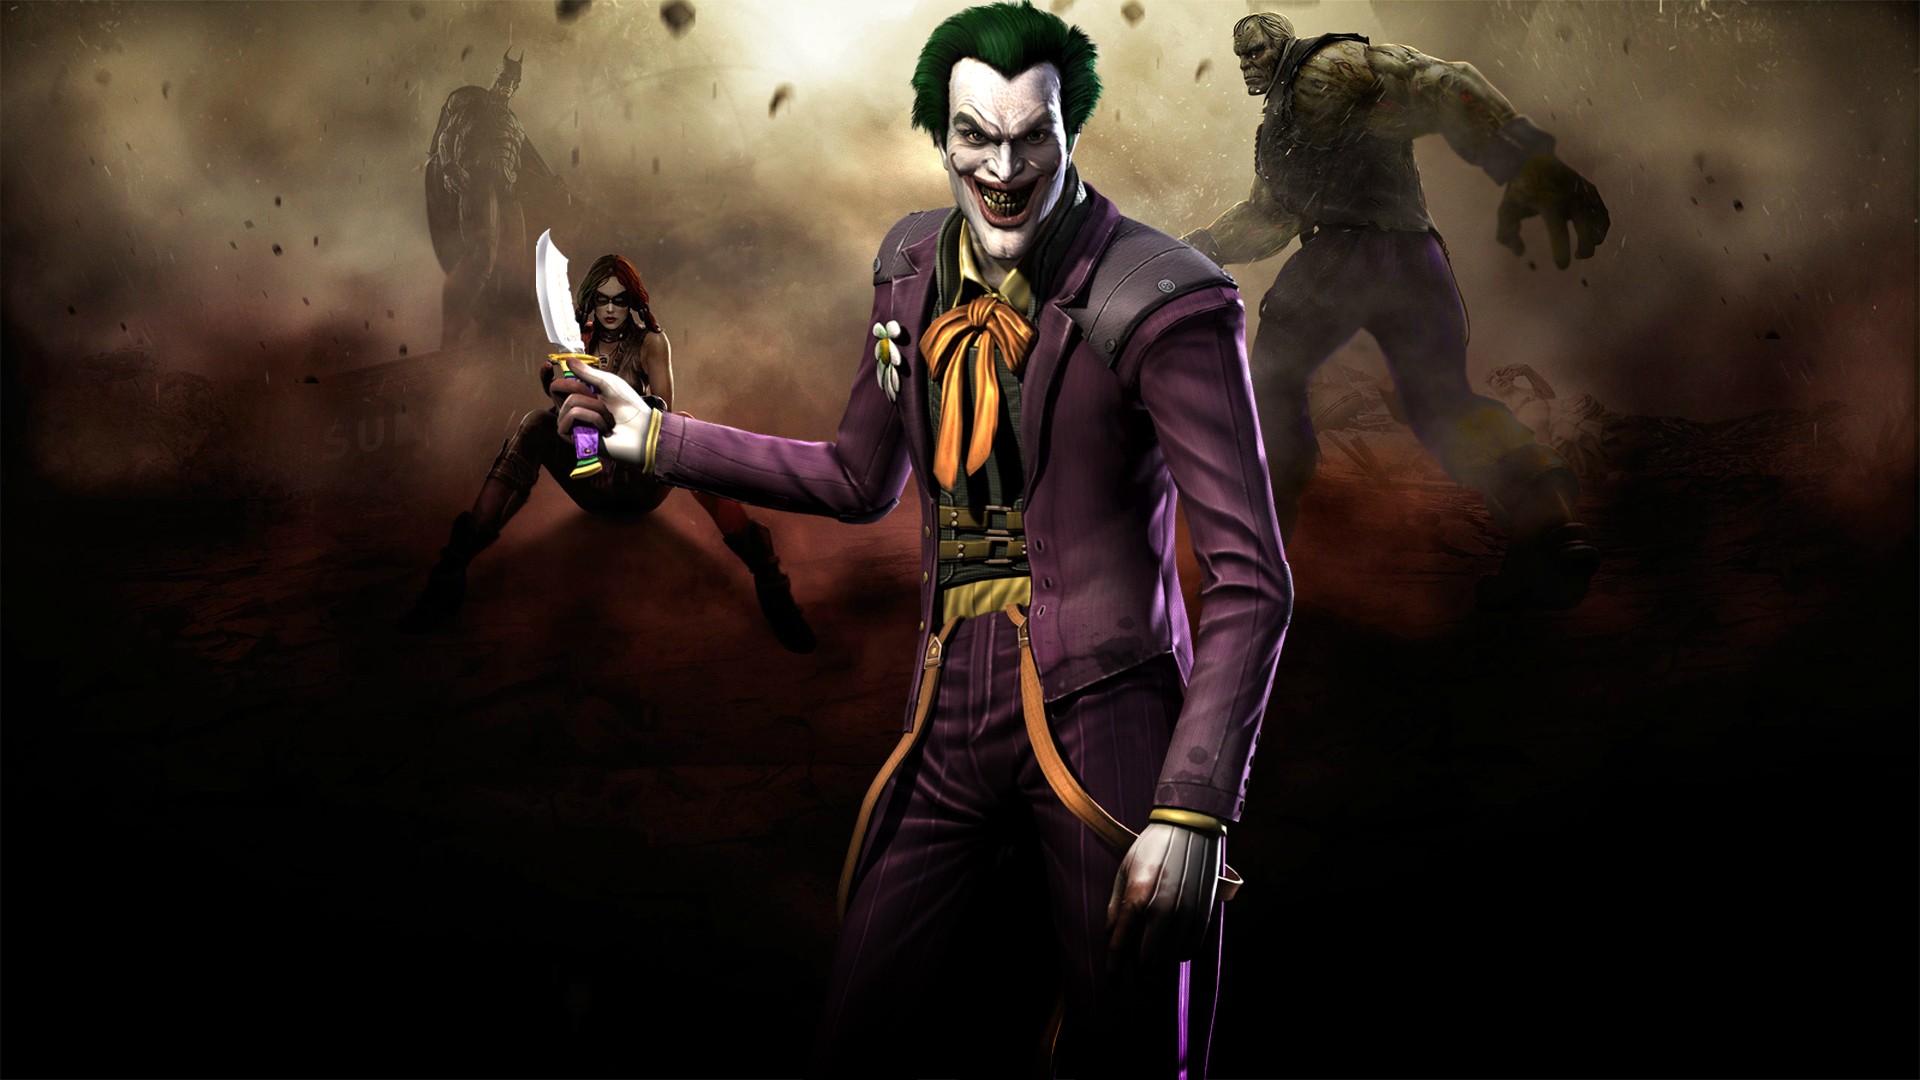 Injustice Gods Among Us Concept Art The Joker Search Pictures Photos